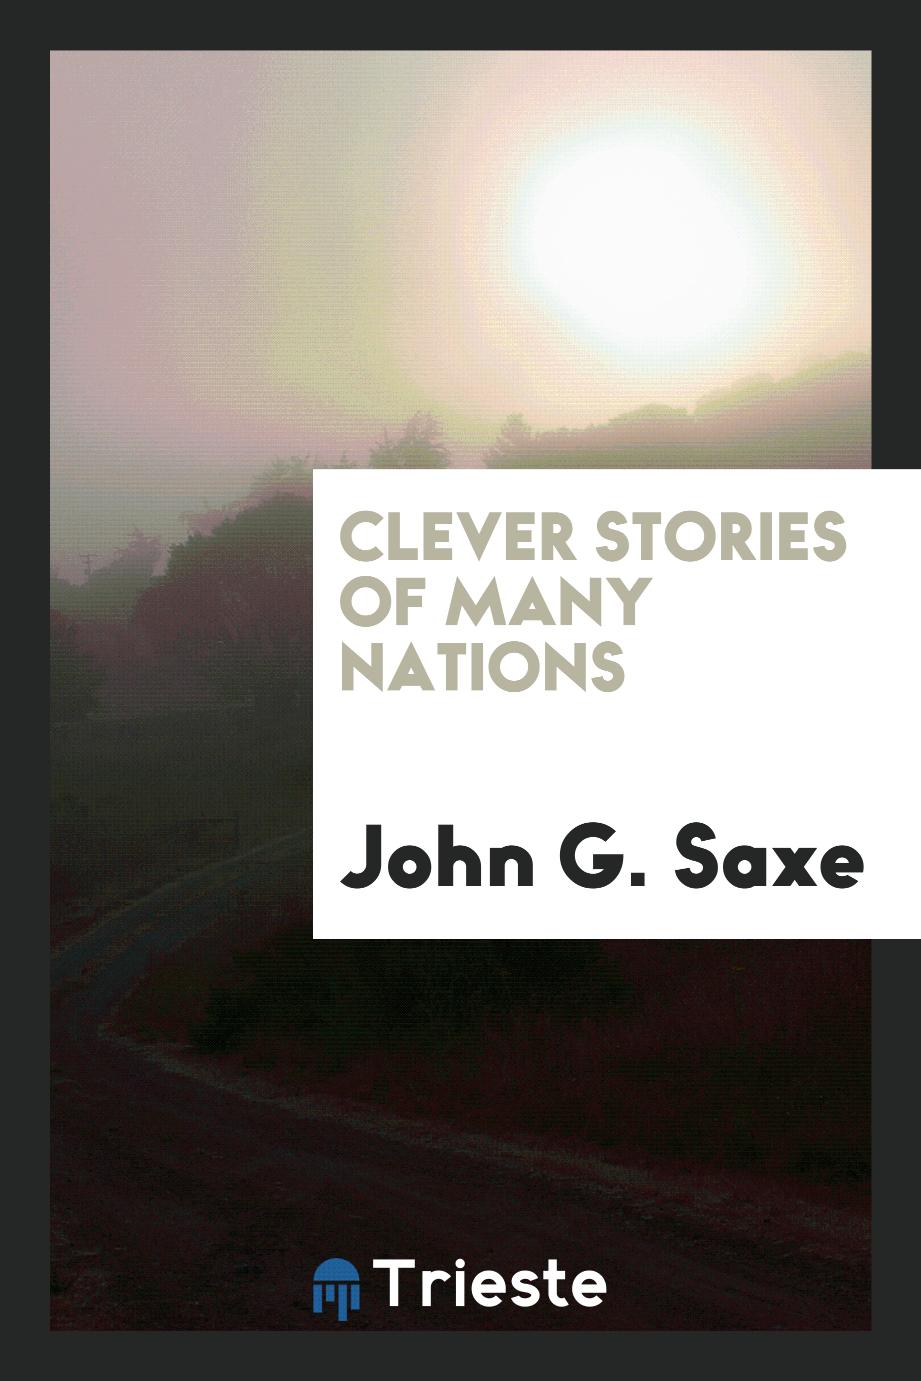 Clever stories of many nations